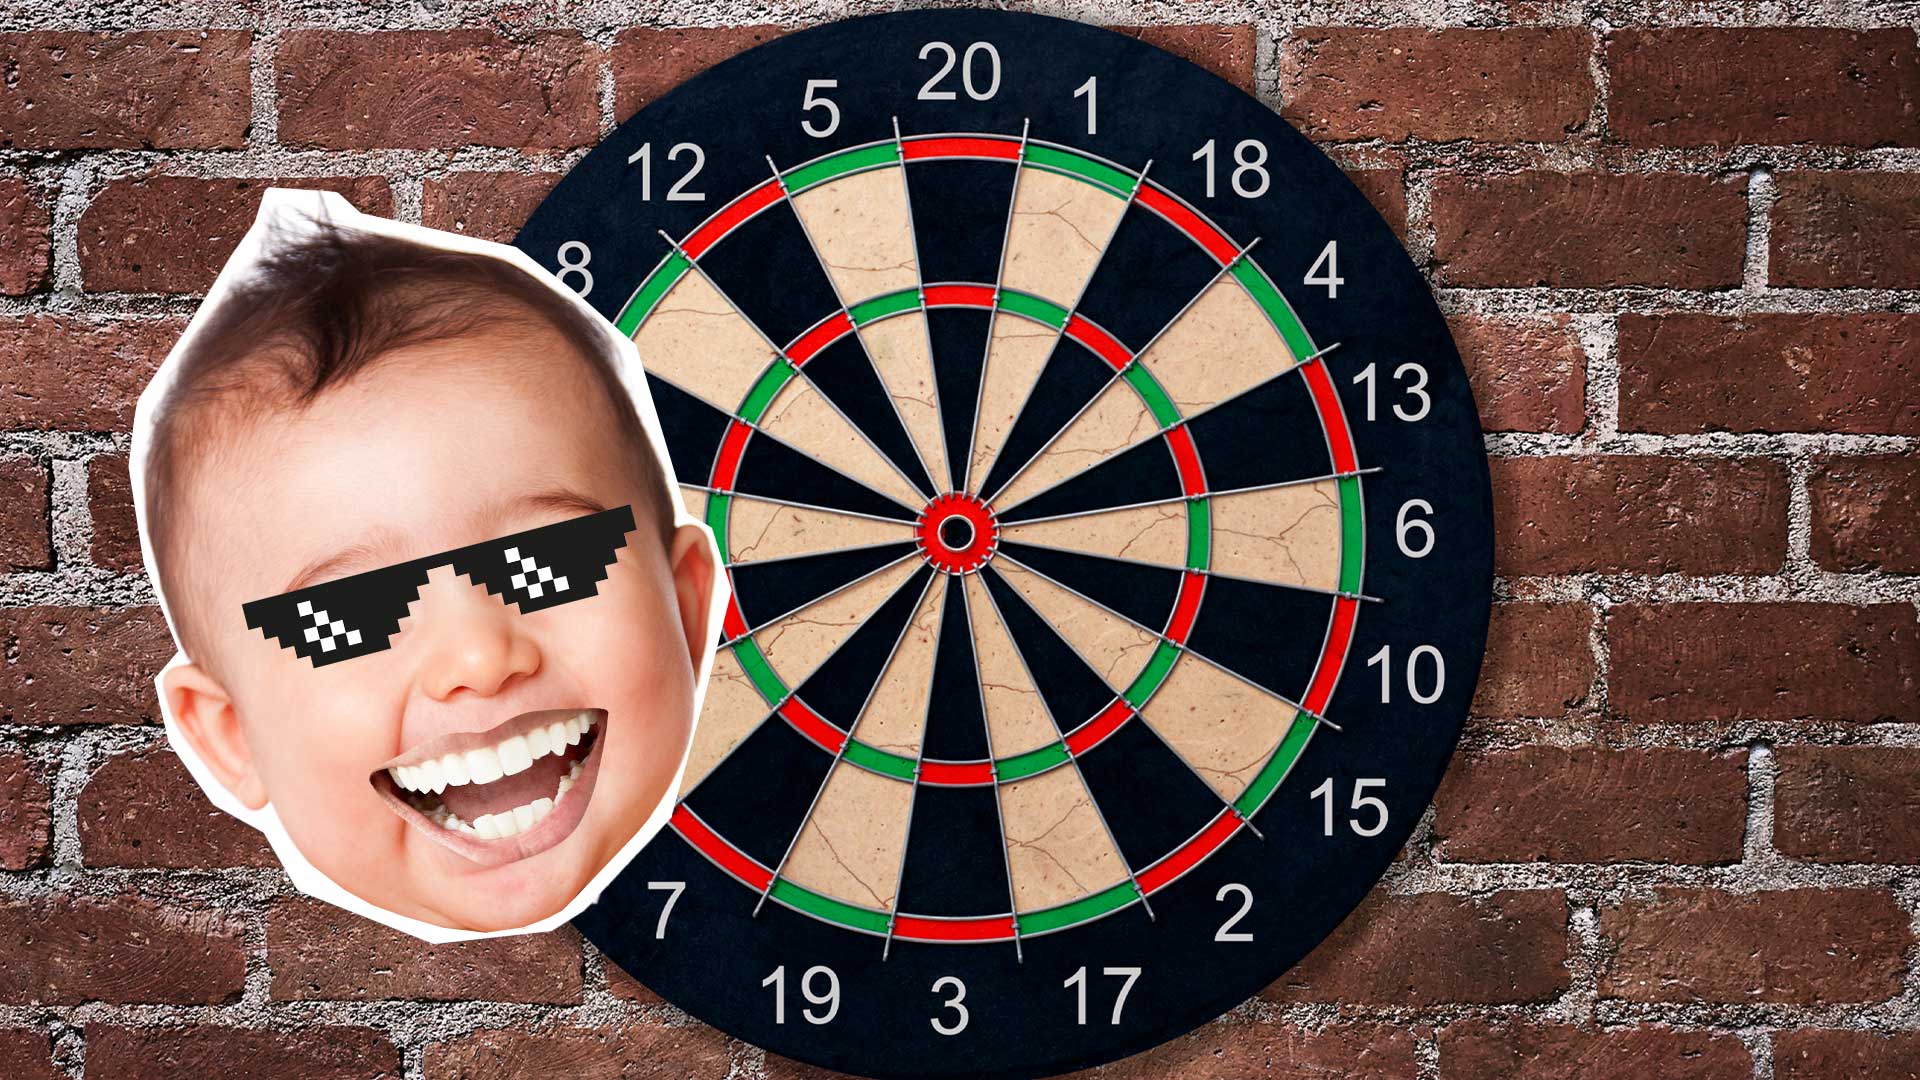 A baby next to a dart board